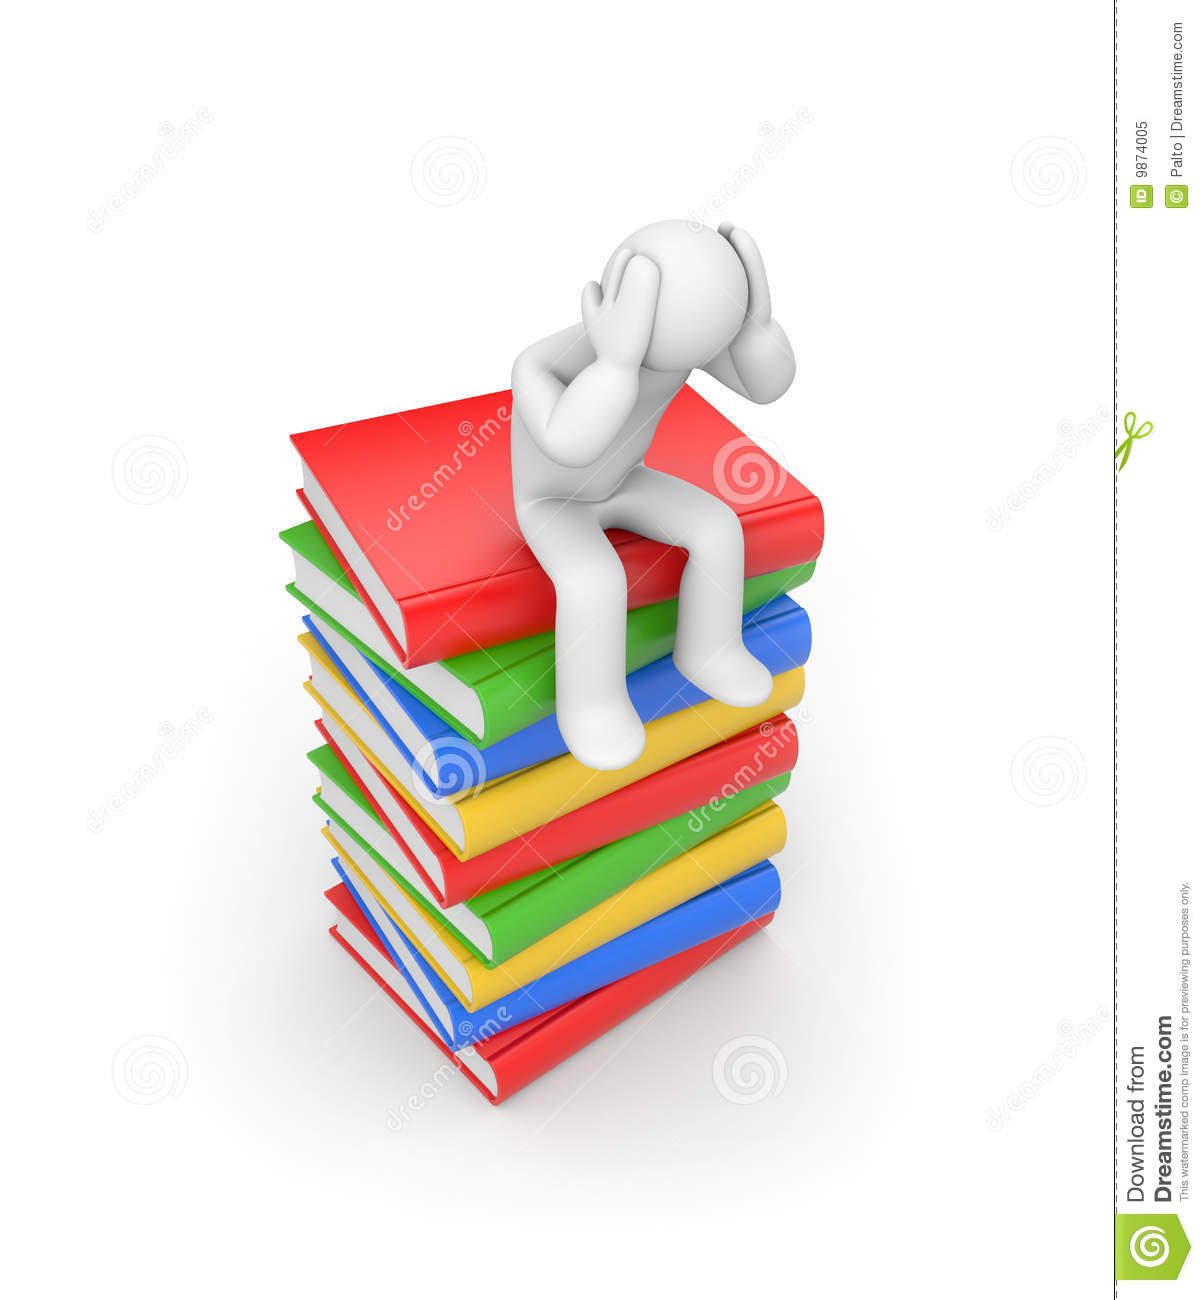 Too Much Knowledge  Royalty Free Stock Photo   Image  9874005